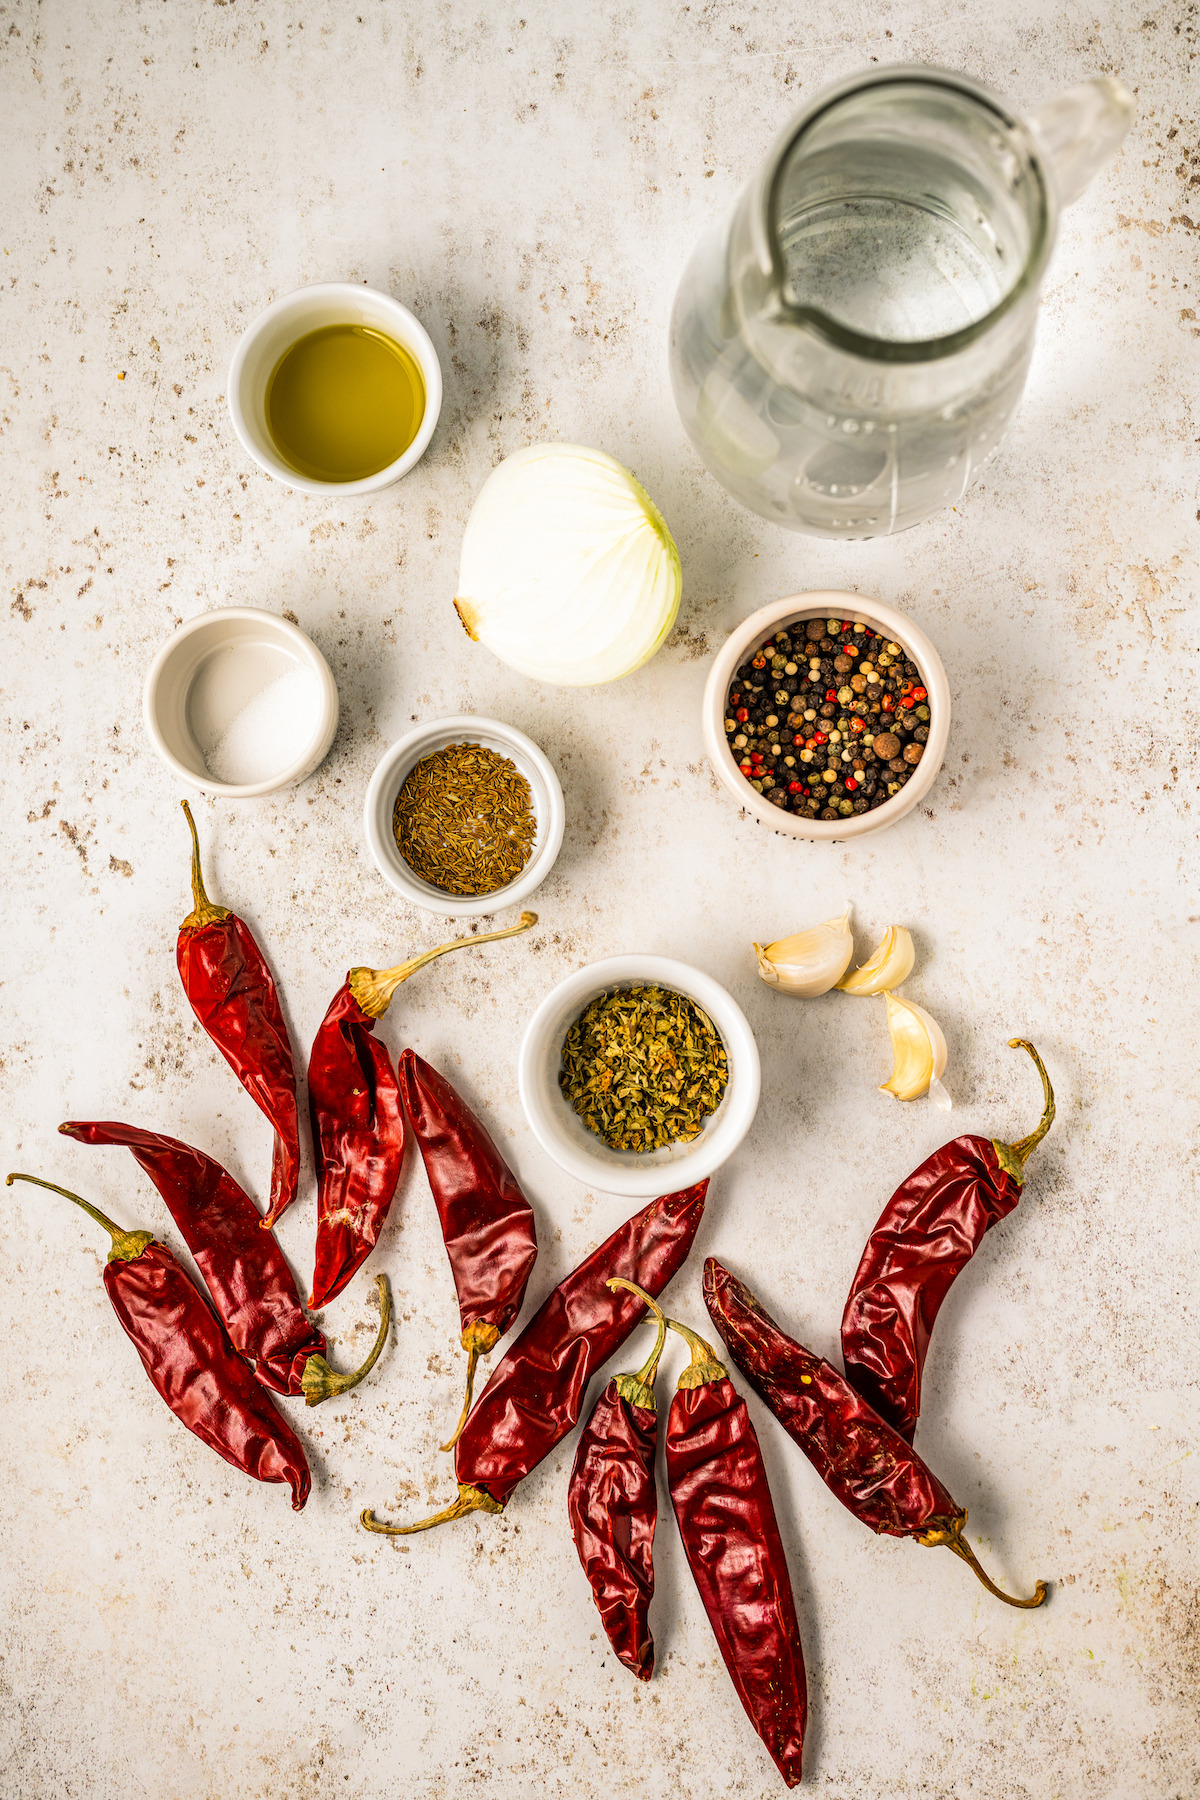 Ingredients for guajillo sauce.